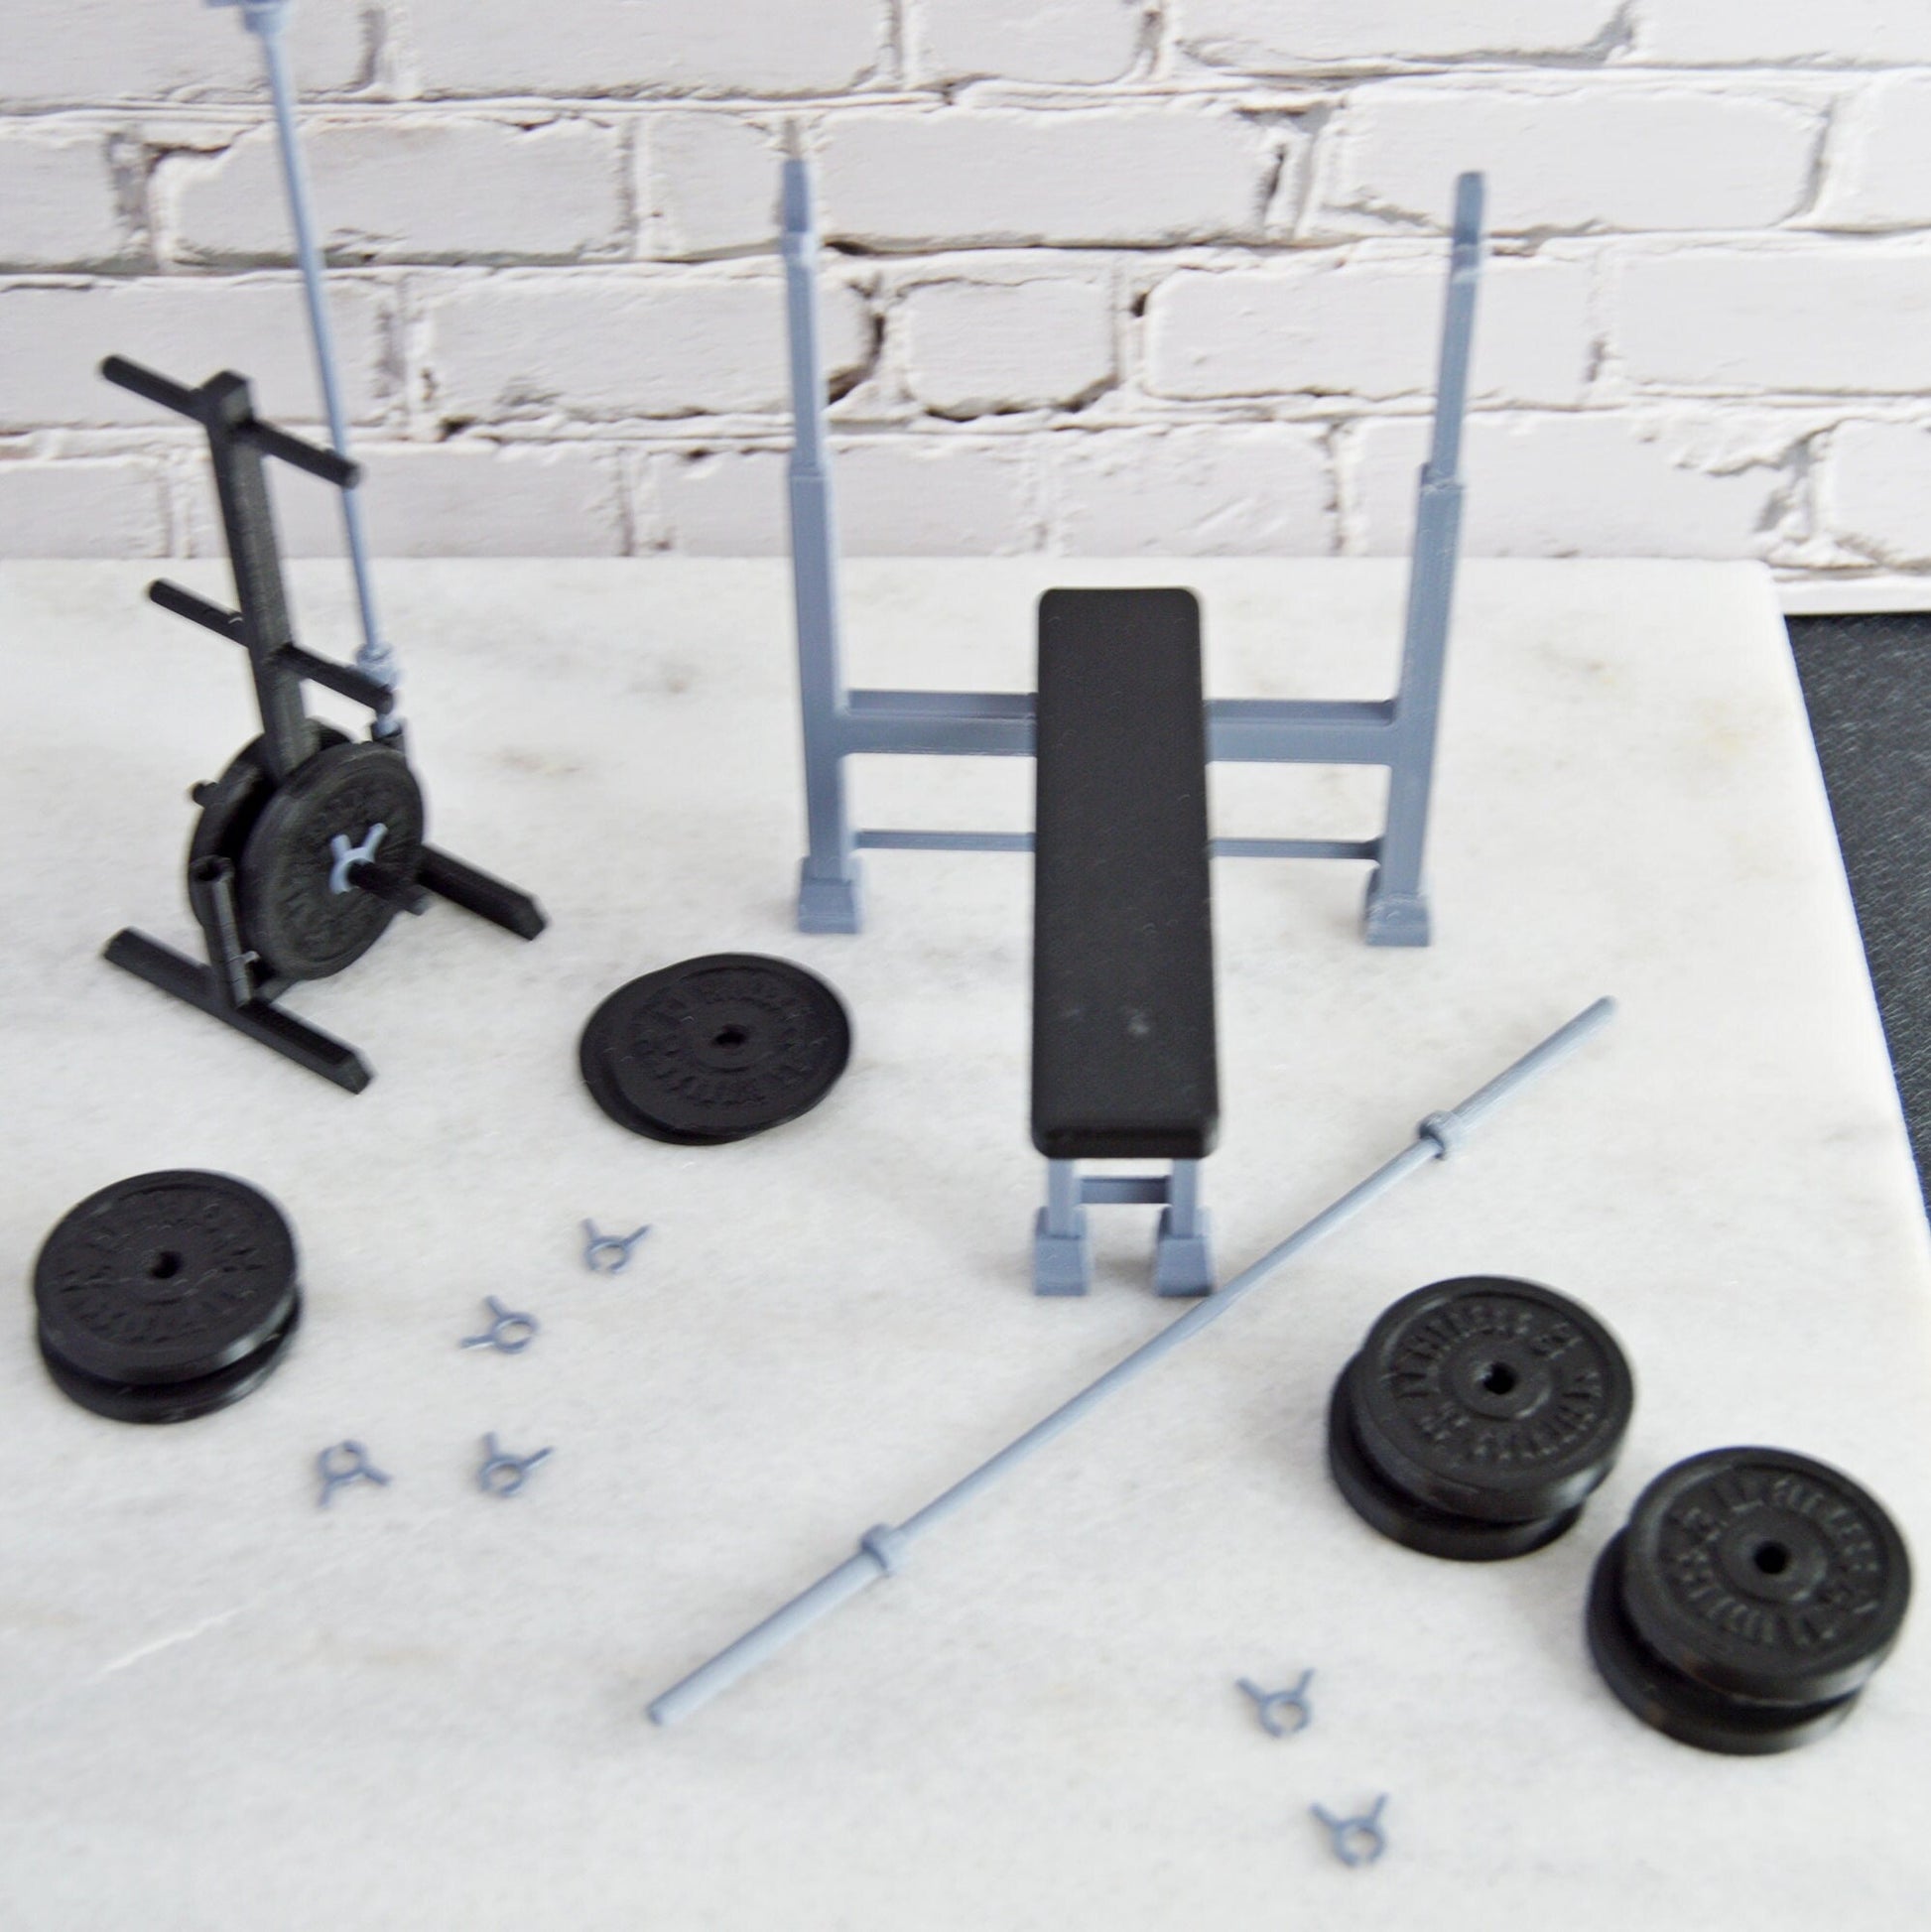 1/6 Scale Gym Set, Miniature Gym Equipment, Exercise Equipment, 1 6 Scale  Dollhouse Furniture, Home Gym Decor, Miniature Weight Plate 